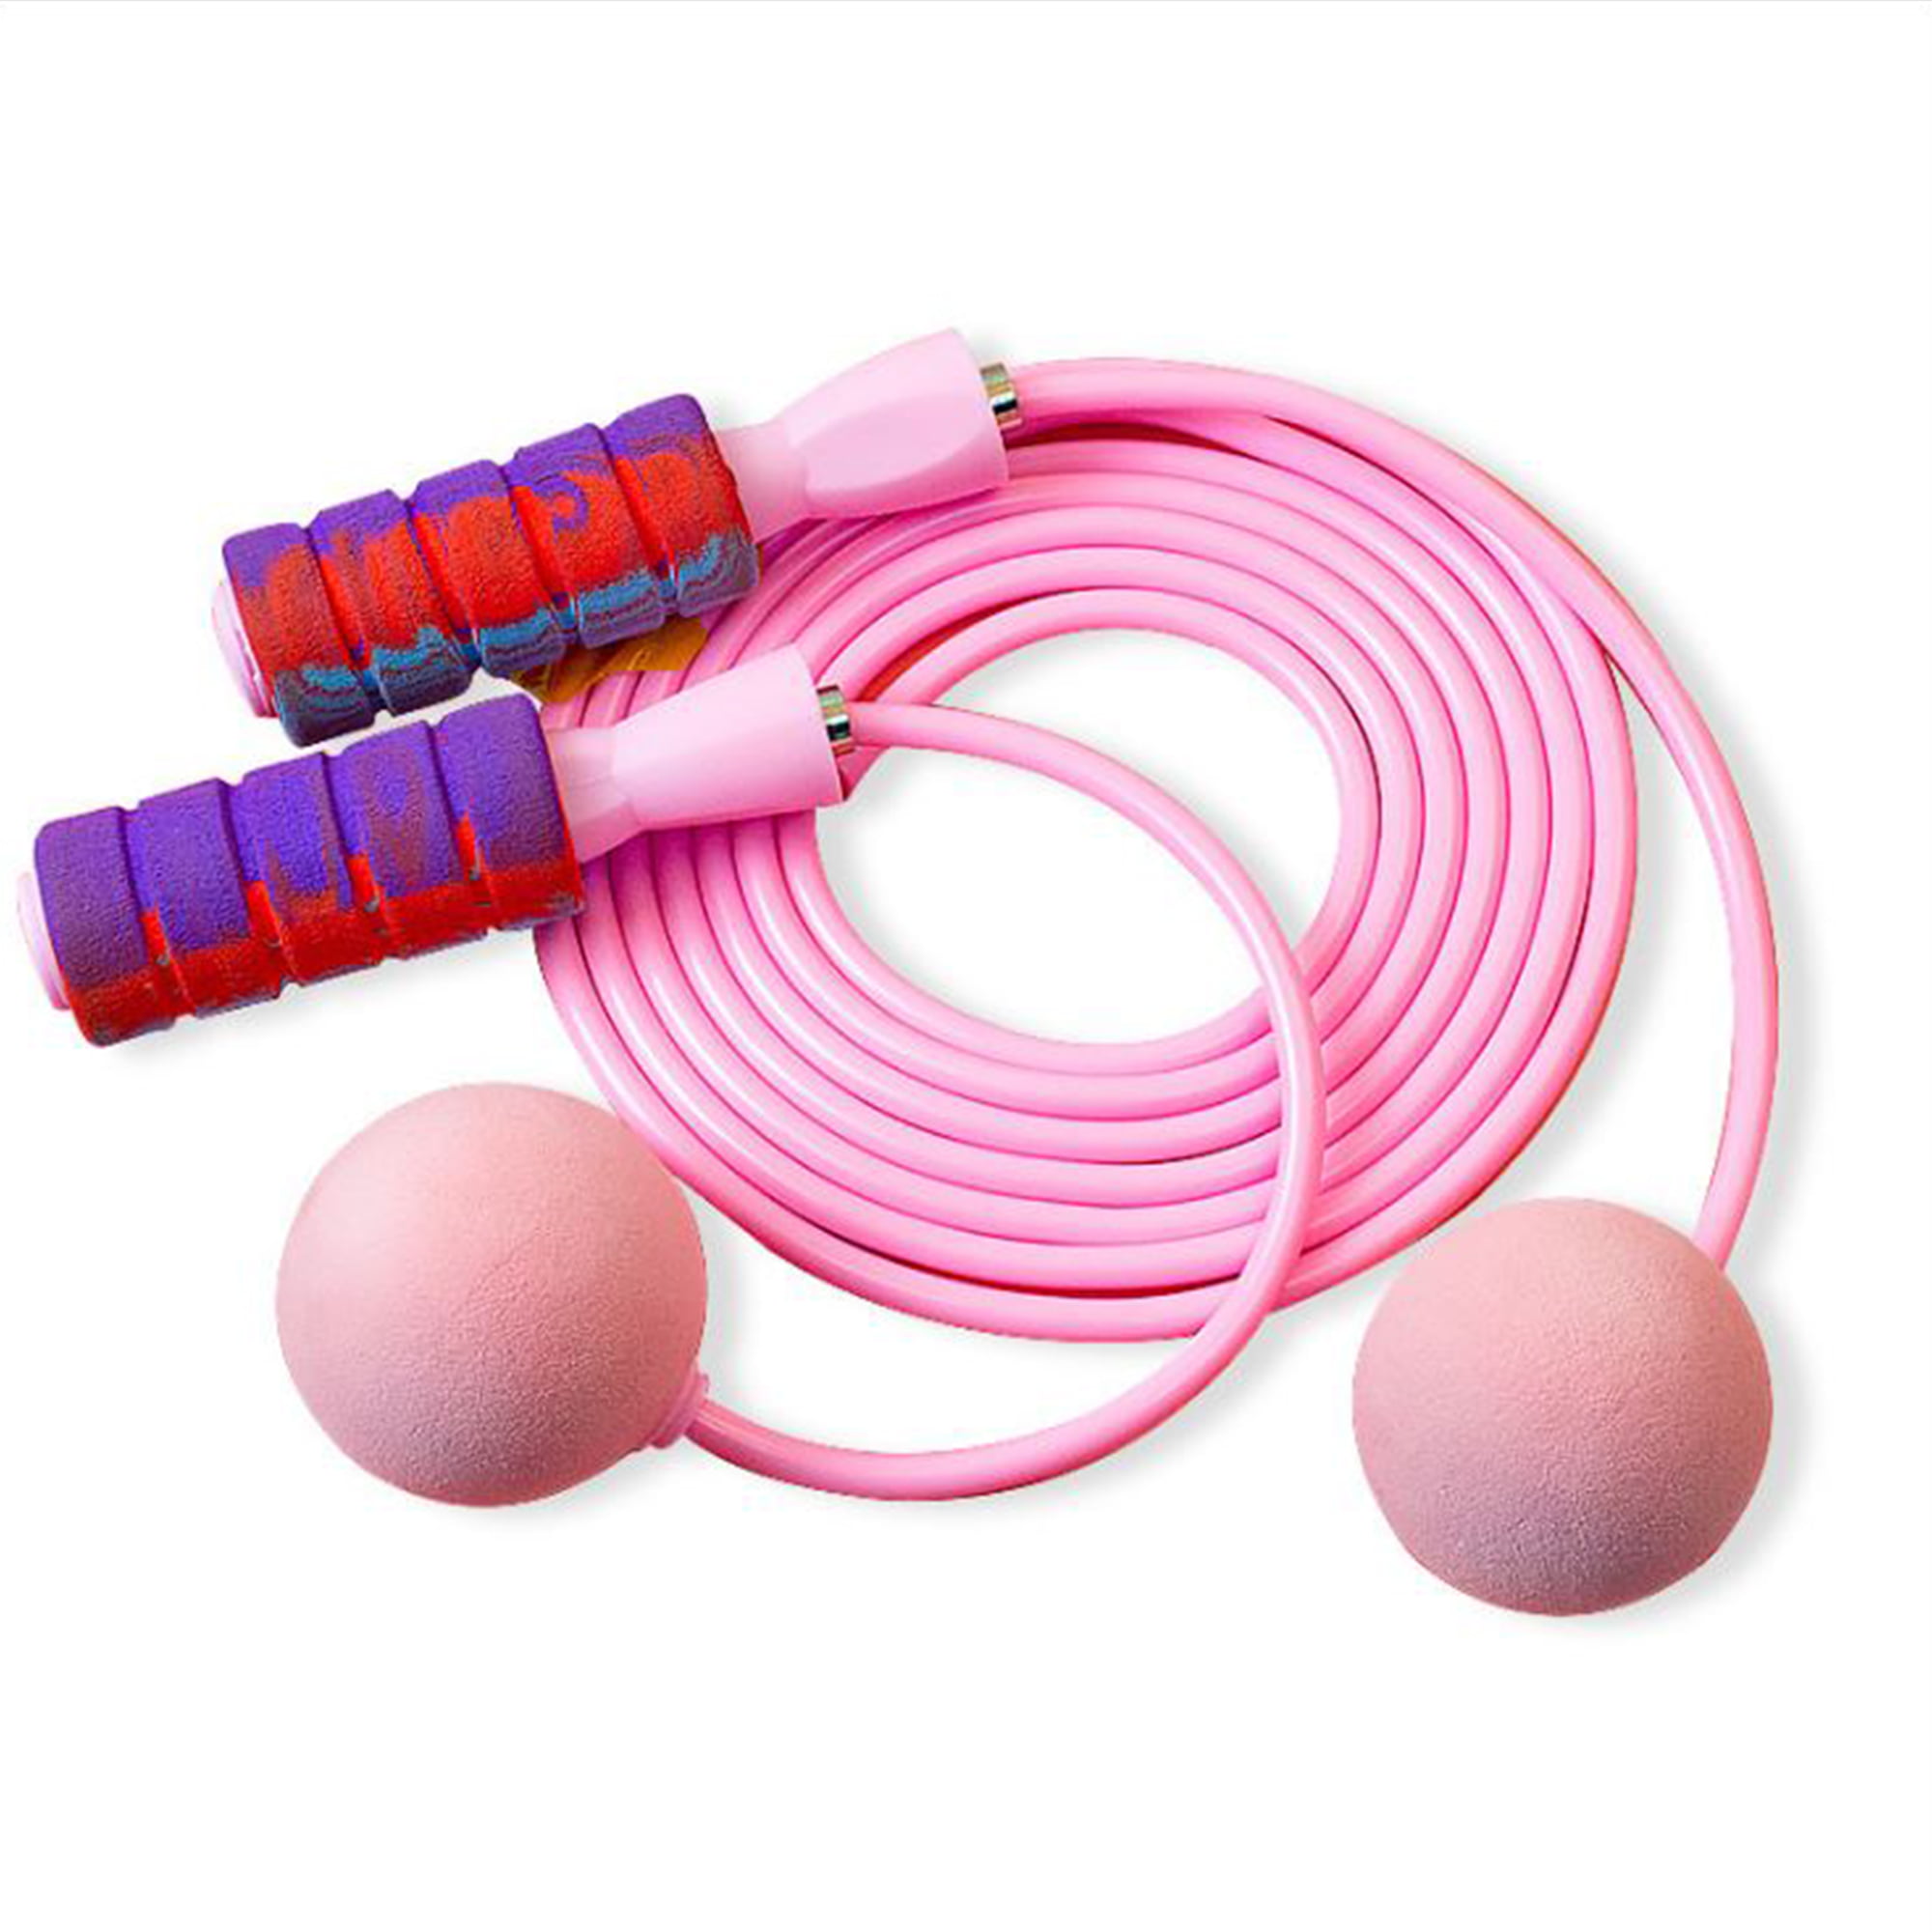 Details about   Adjustable Skipping Rope Fitness Speed Jumping Weight Loss Exercise Gym Training